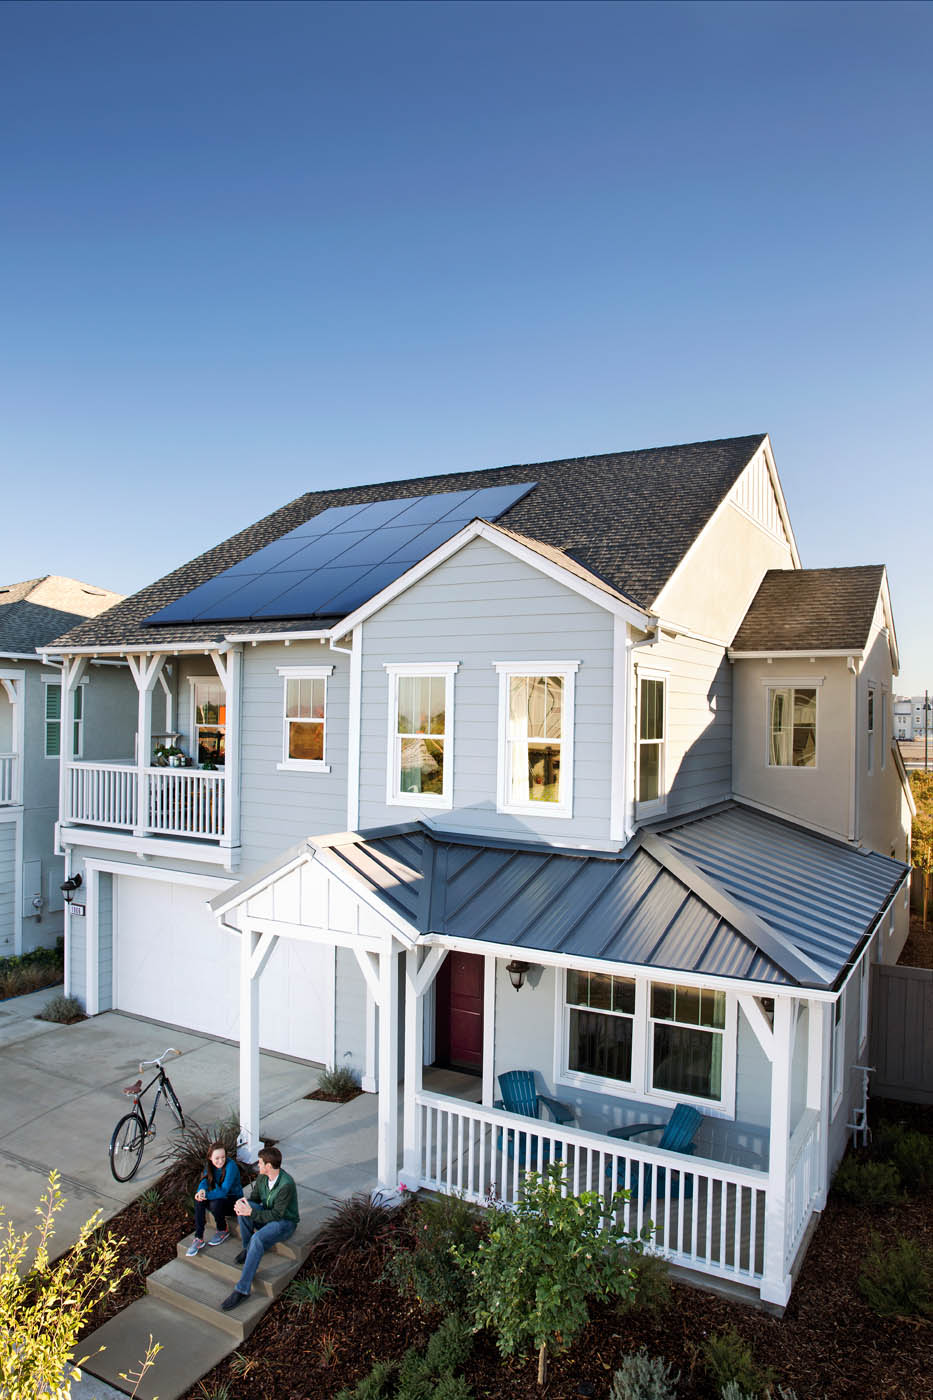 A white house with front contact panels on the roof, provided by SunPower installers in South Carolina & Georgia.